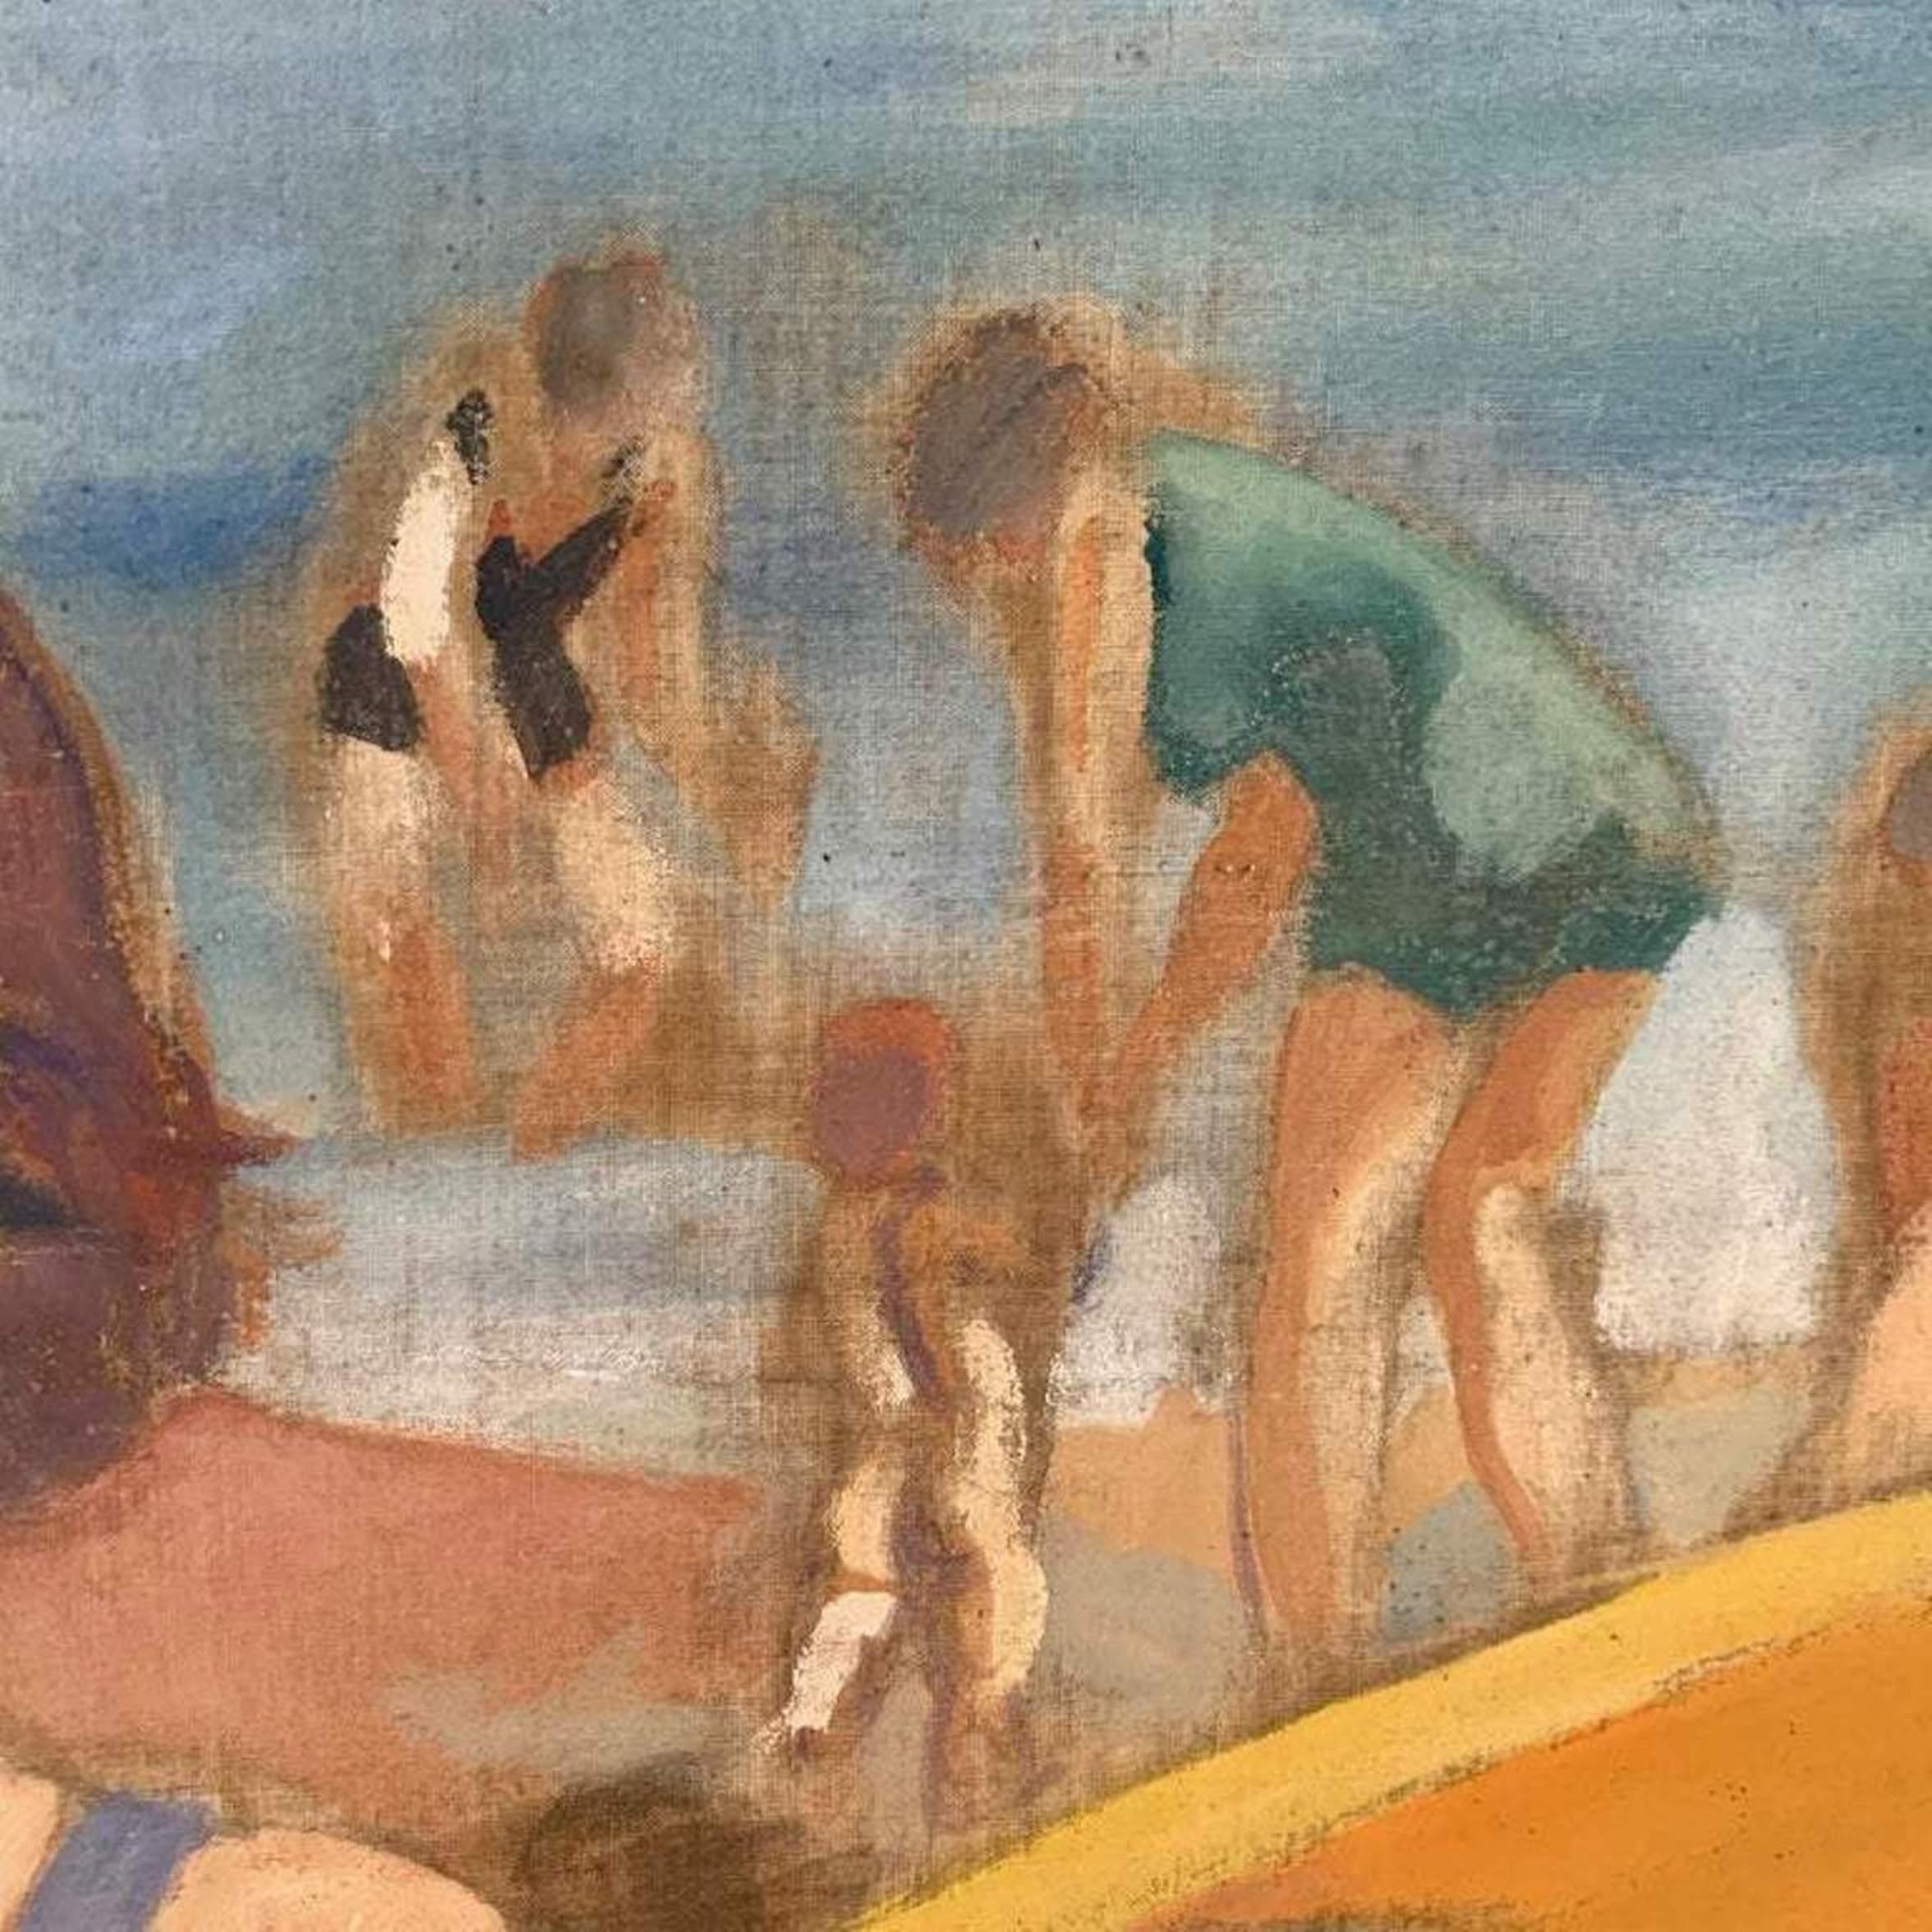 French Art Deco oil painting titled 'Day At The Beach' created by Henri Pedezert in circa 
1930. The piece depicts a group of beach-goers in colorful bathing suits and beach wear 
of the period, lounging in the sun. Pedezert was active in the